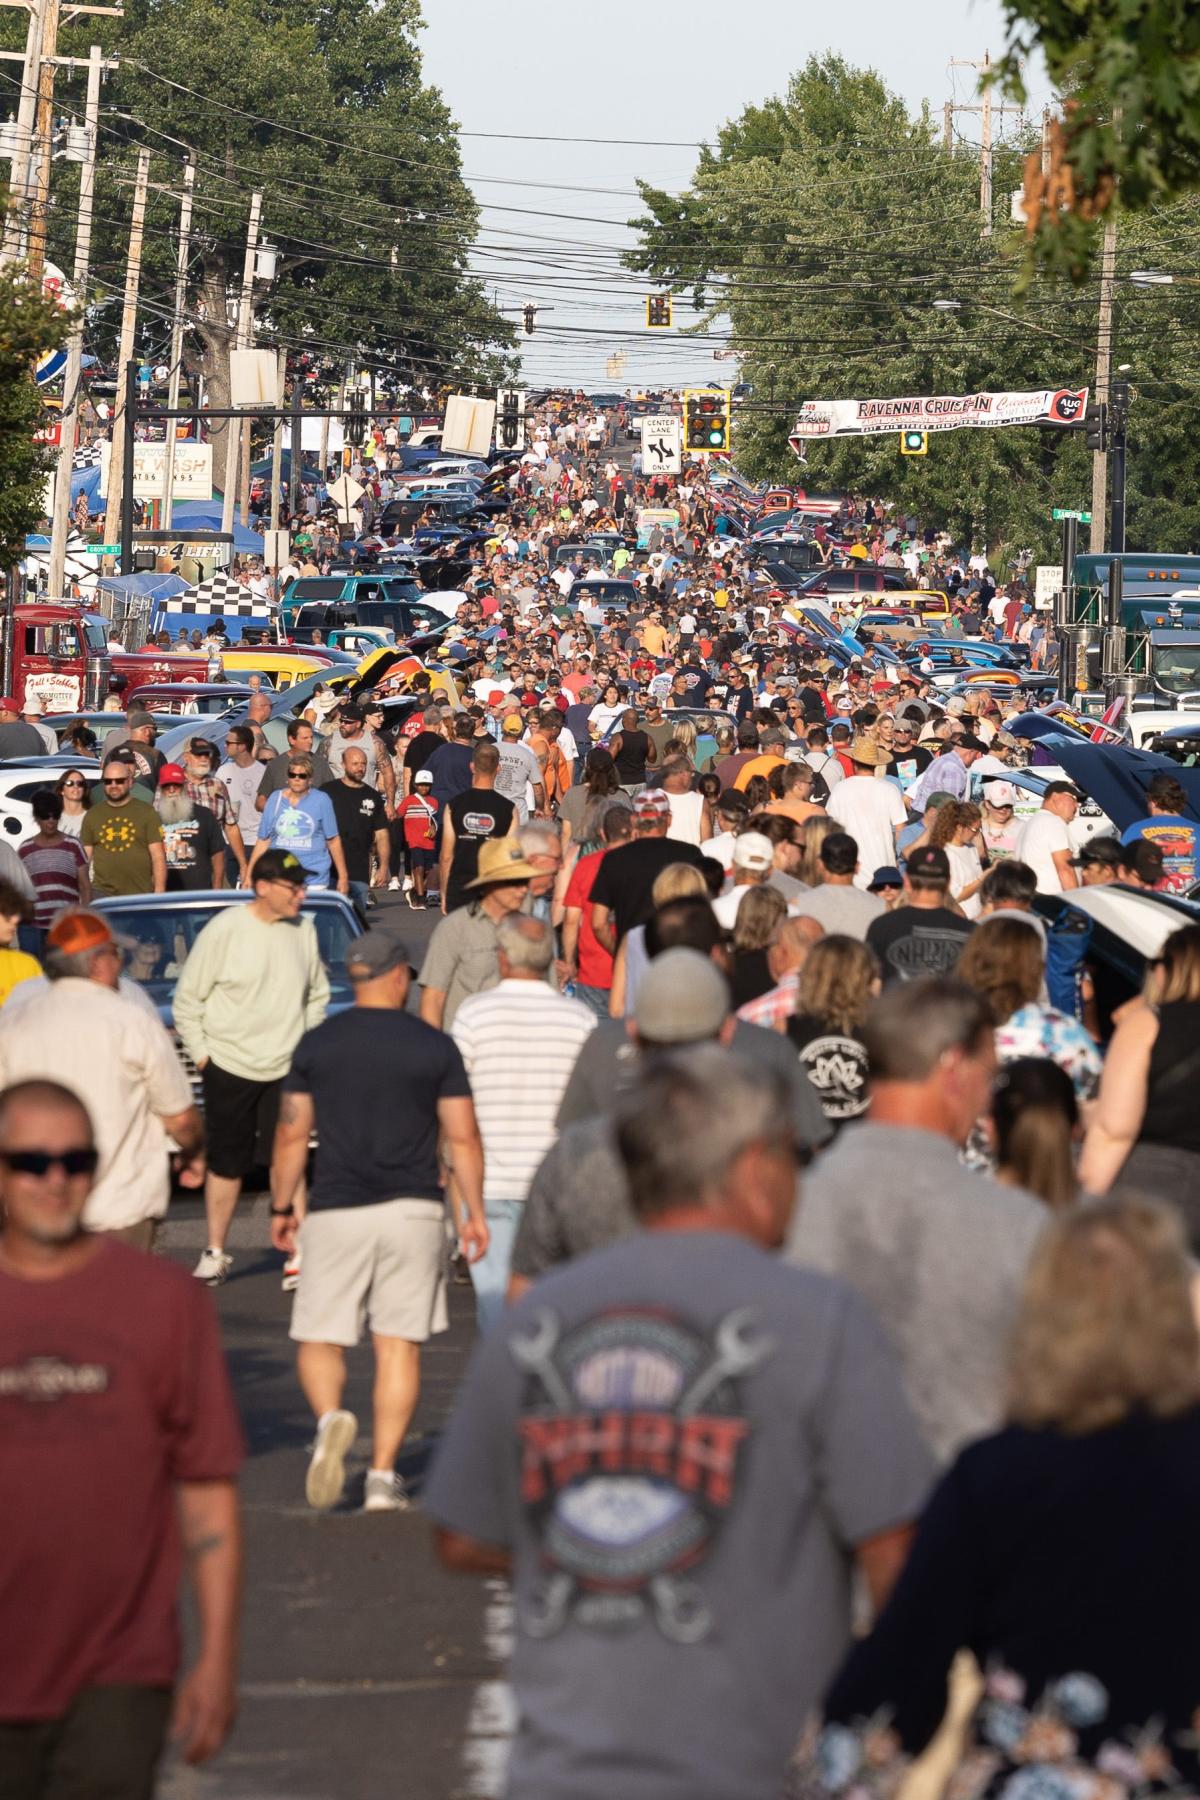 Celebrate Portage! Car Show draws 4,000 cars, roughly 15,000 visitors